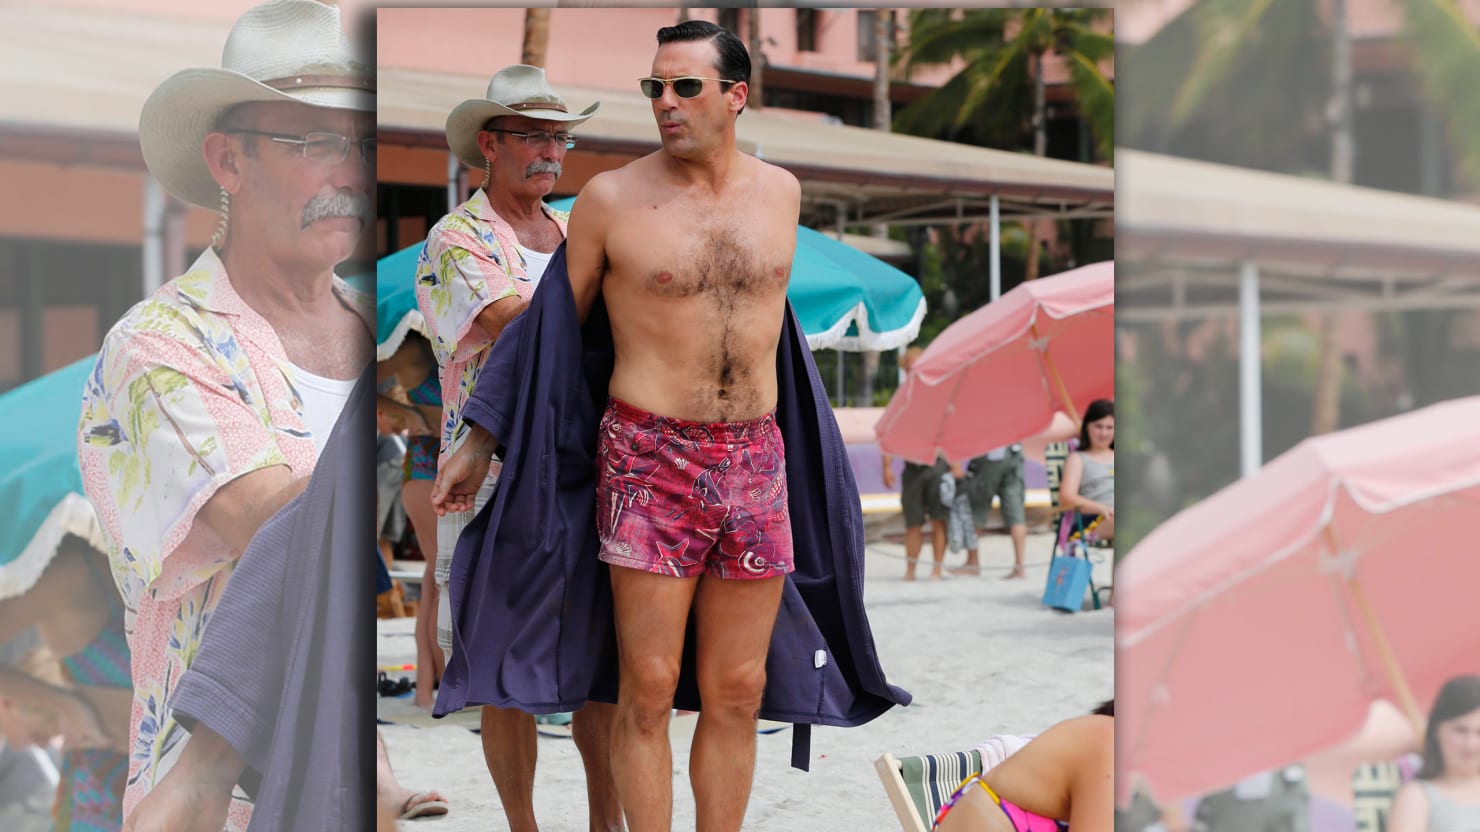 Why is Jon Hamm airbrushed to hell in this Progressive Ad? R